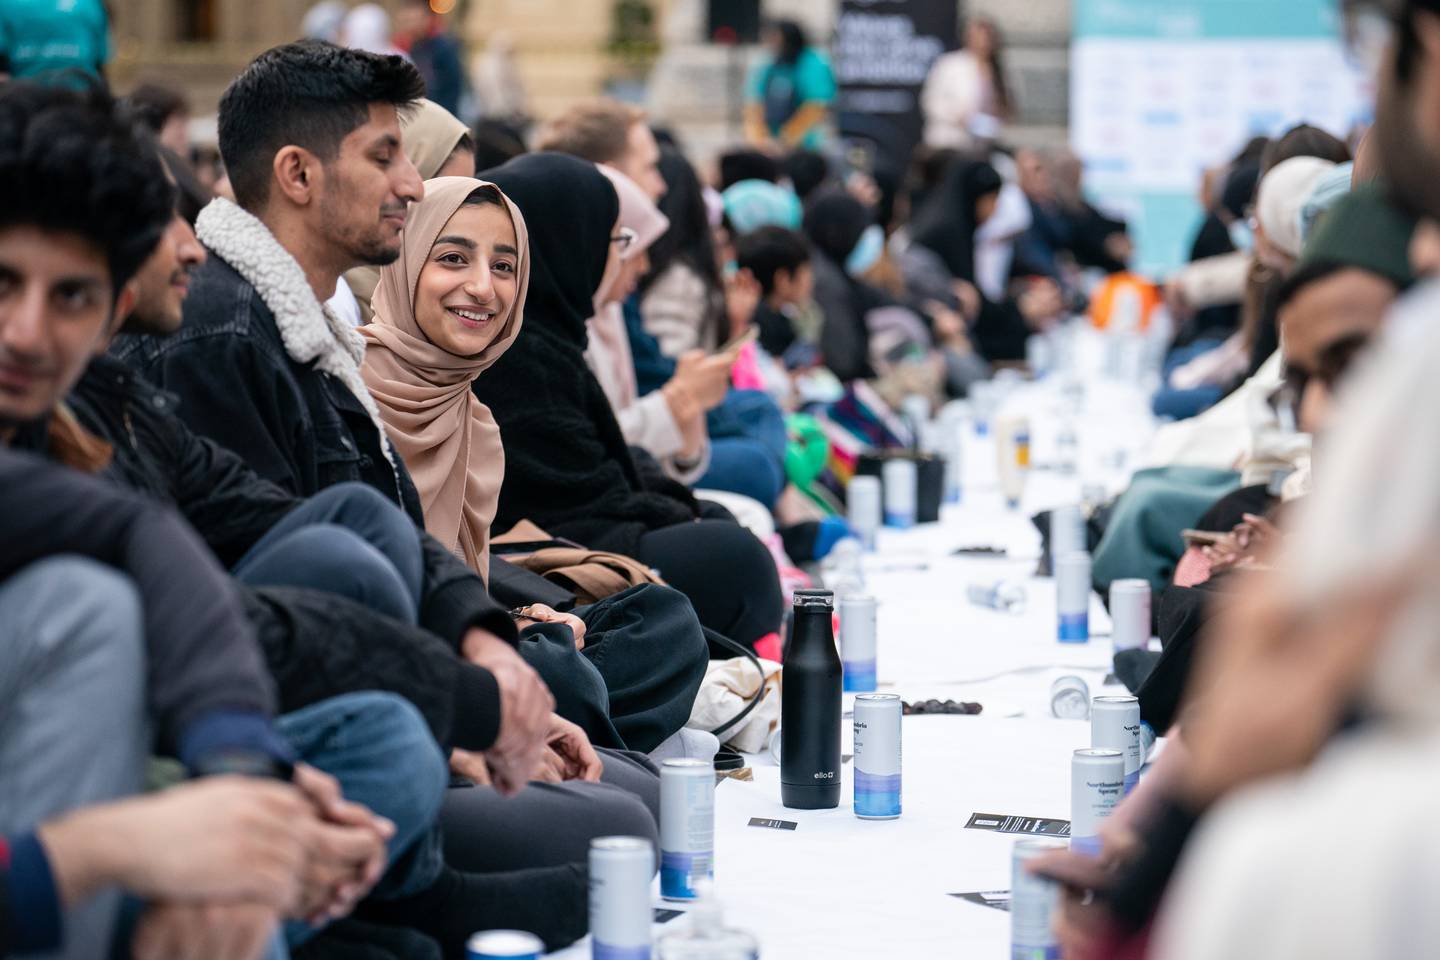 People gather at the UK's largest open iftar.